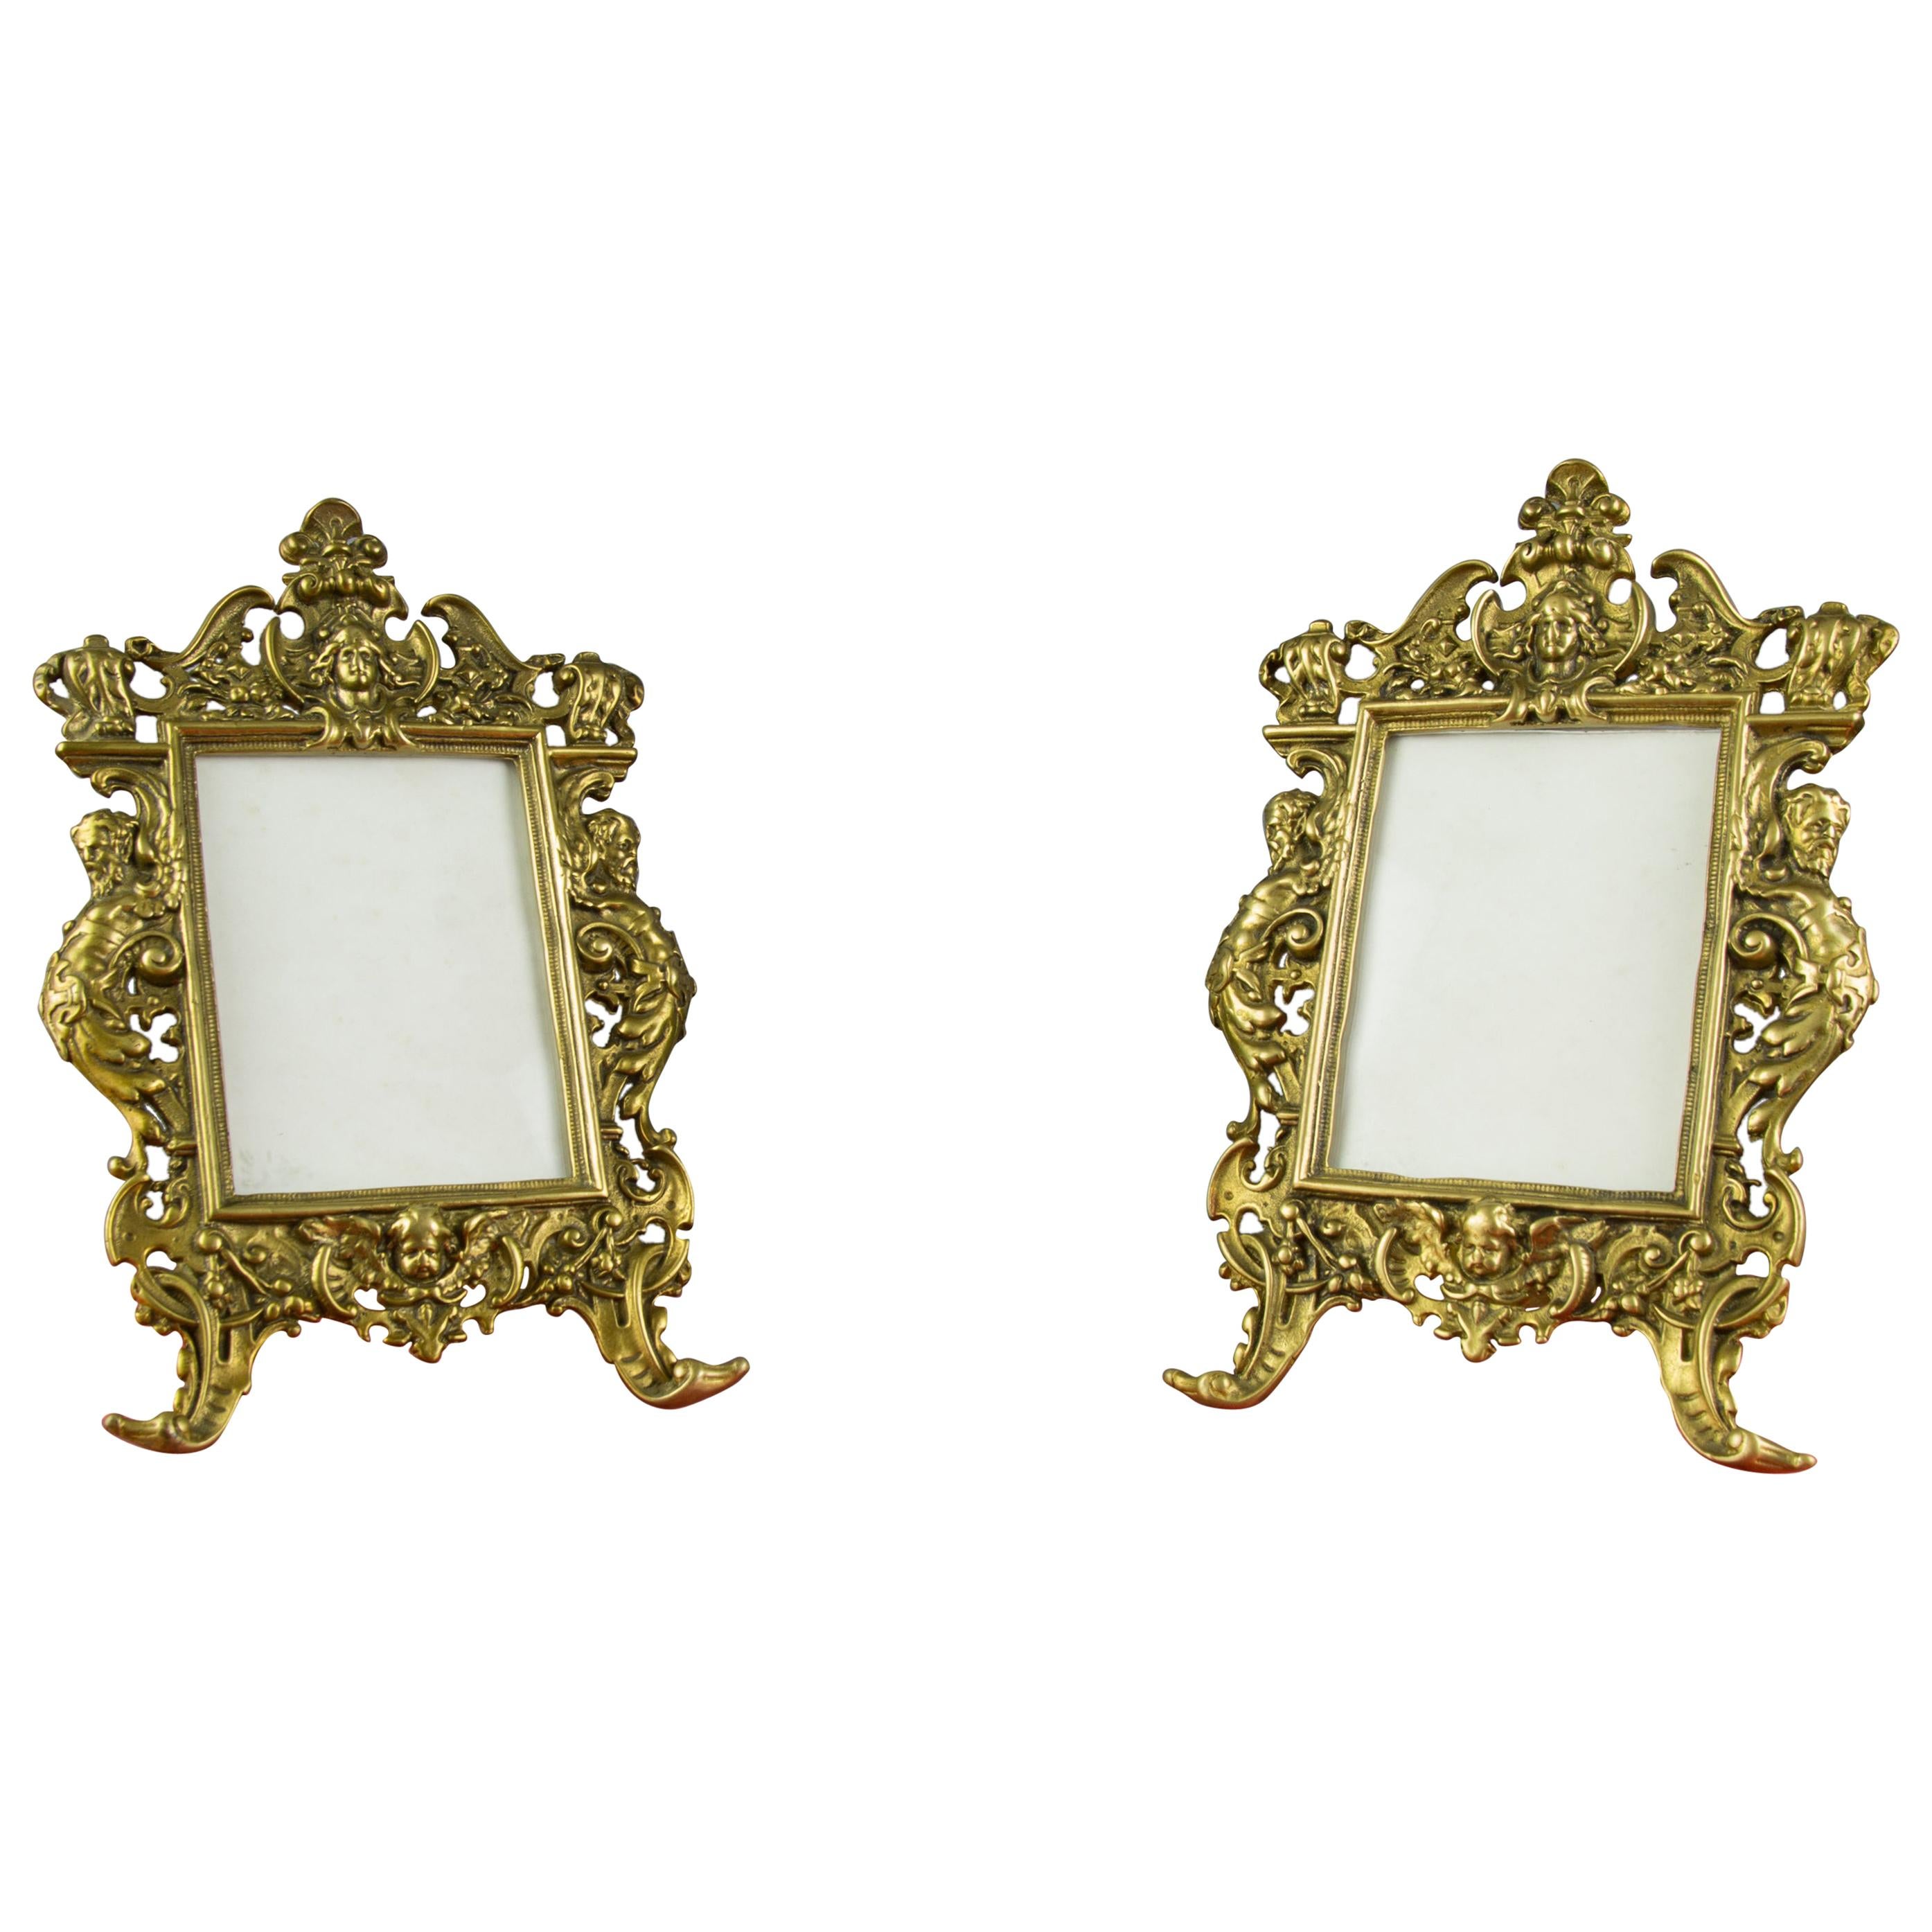 Pair of Neoclassical Style Bronze Photo or Picture Frames, France, 1930s